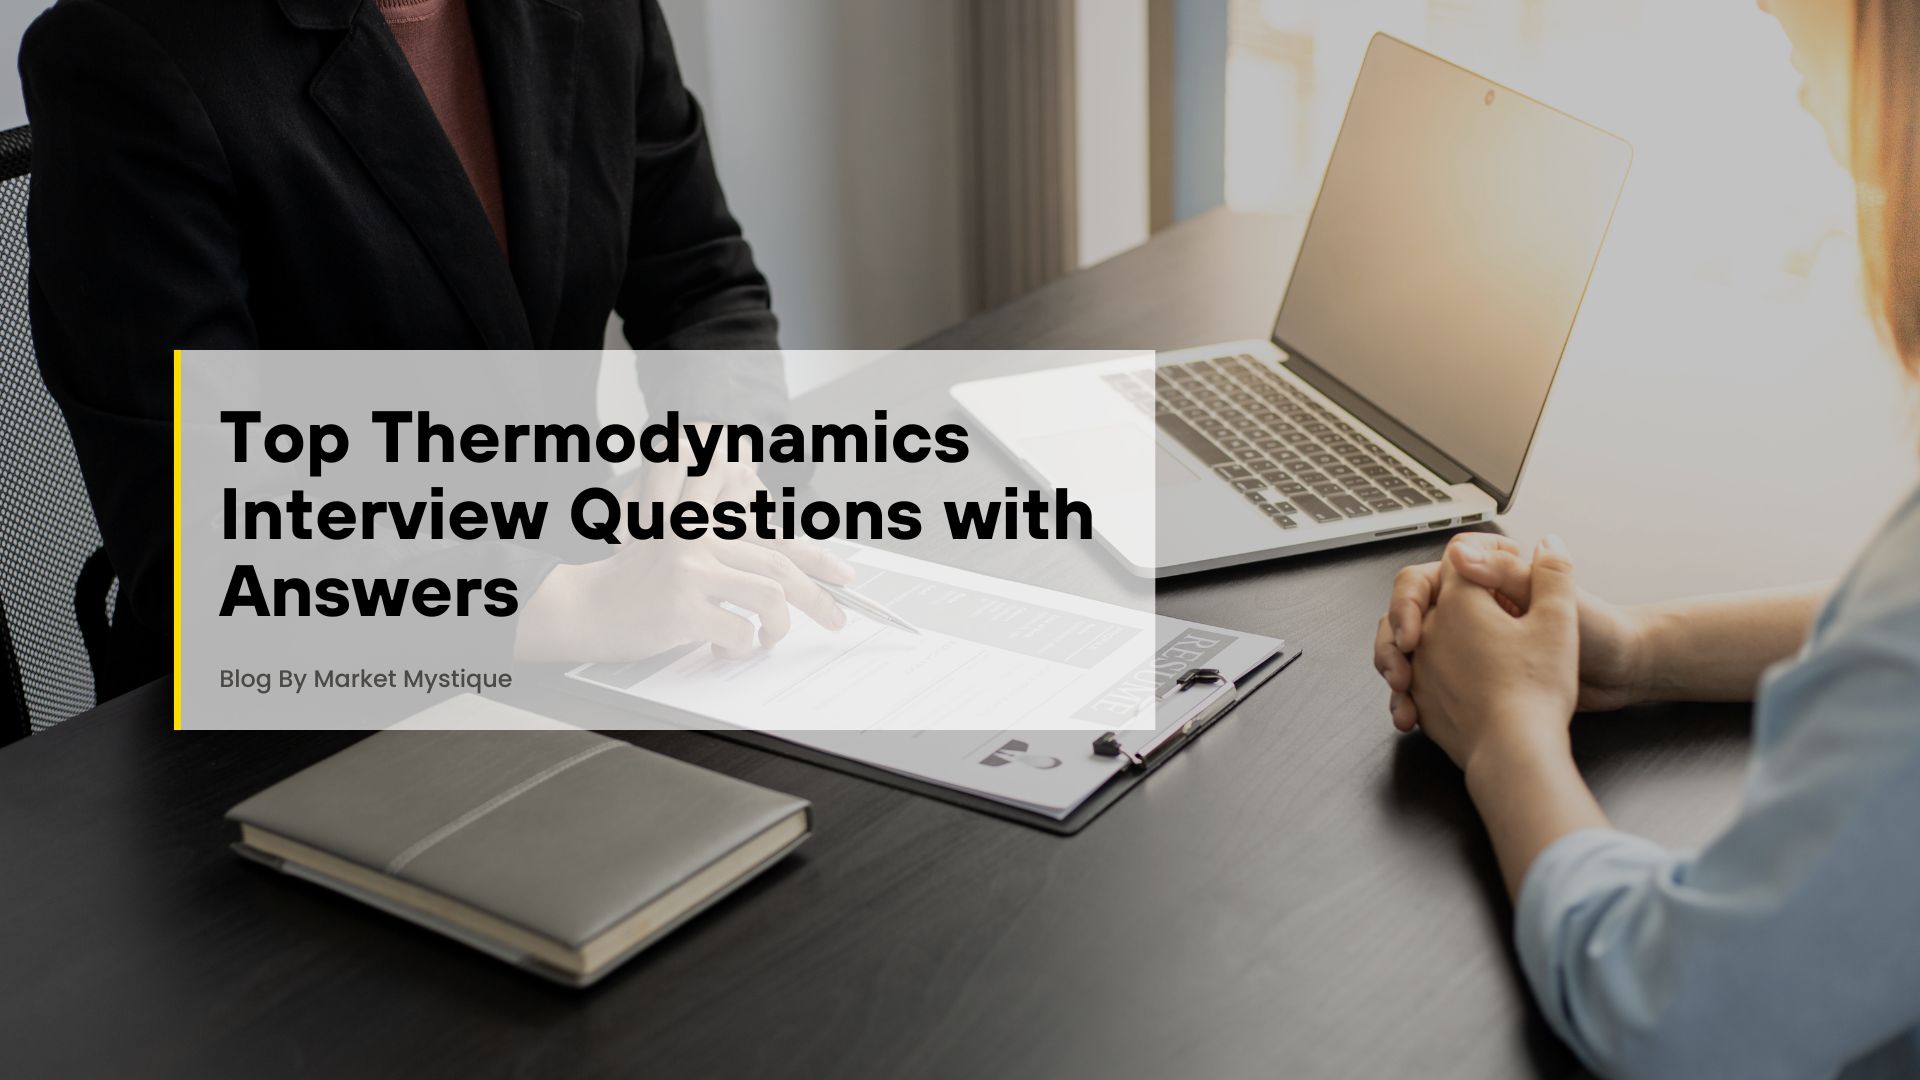 Top Thermodynamics Interview Questions with Answers